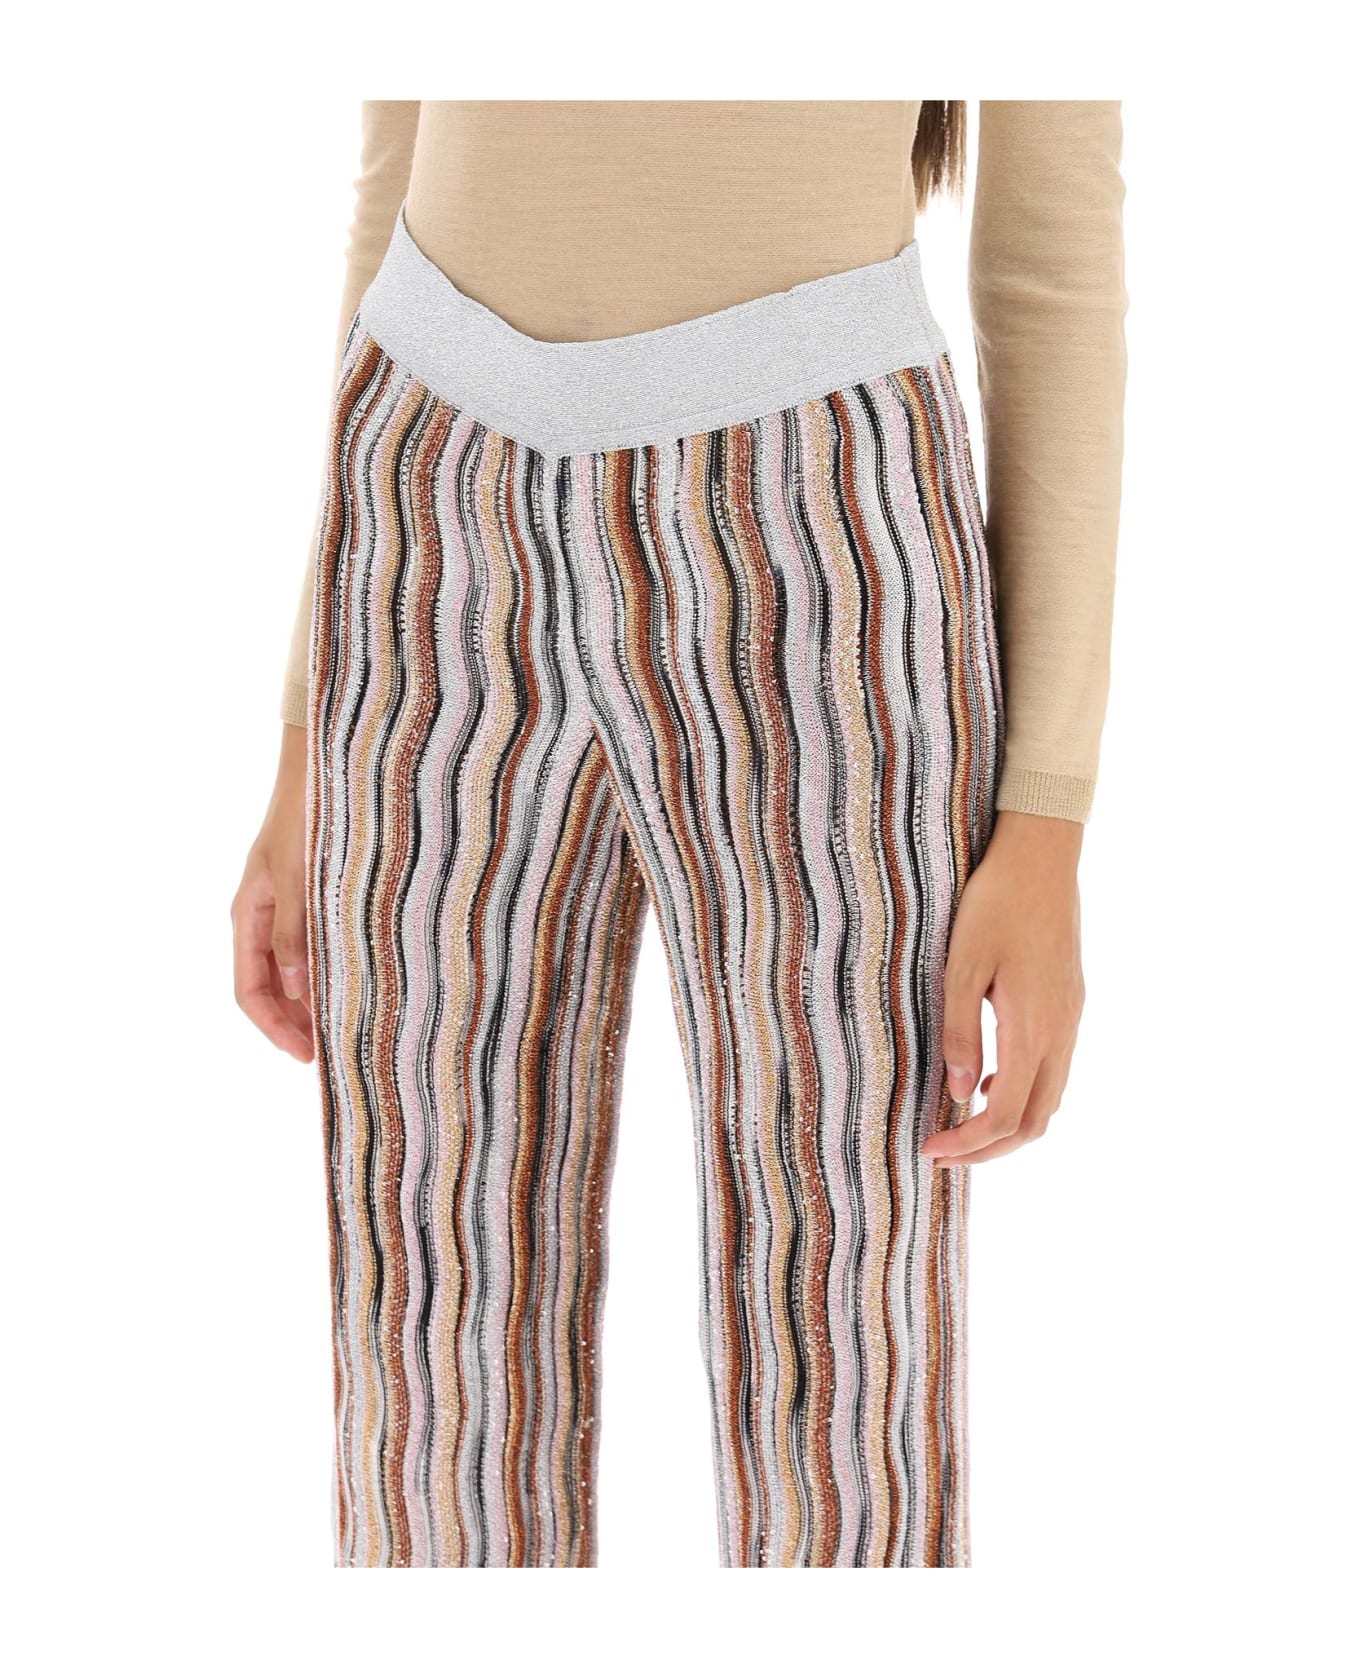 Missoni Sequined Knit Pants With Wavy Motif - MULTI PAILL ORANG RE (Metallic)